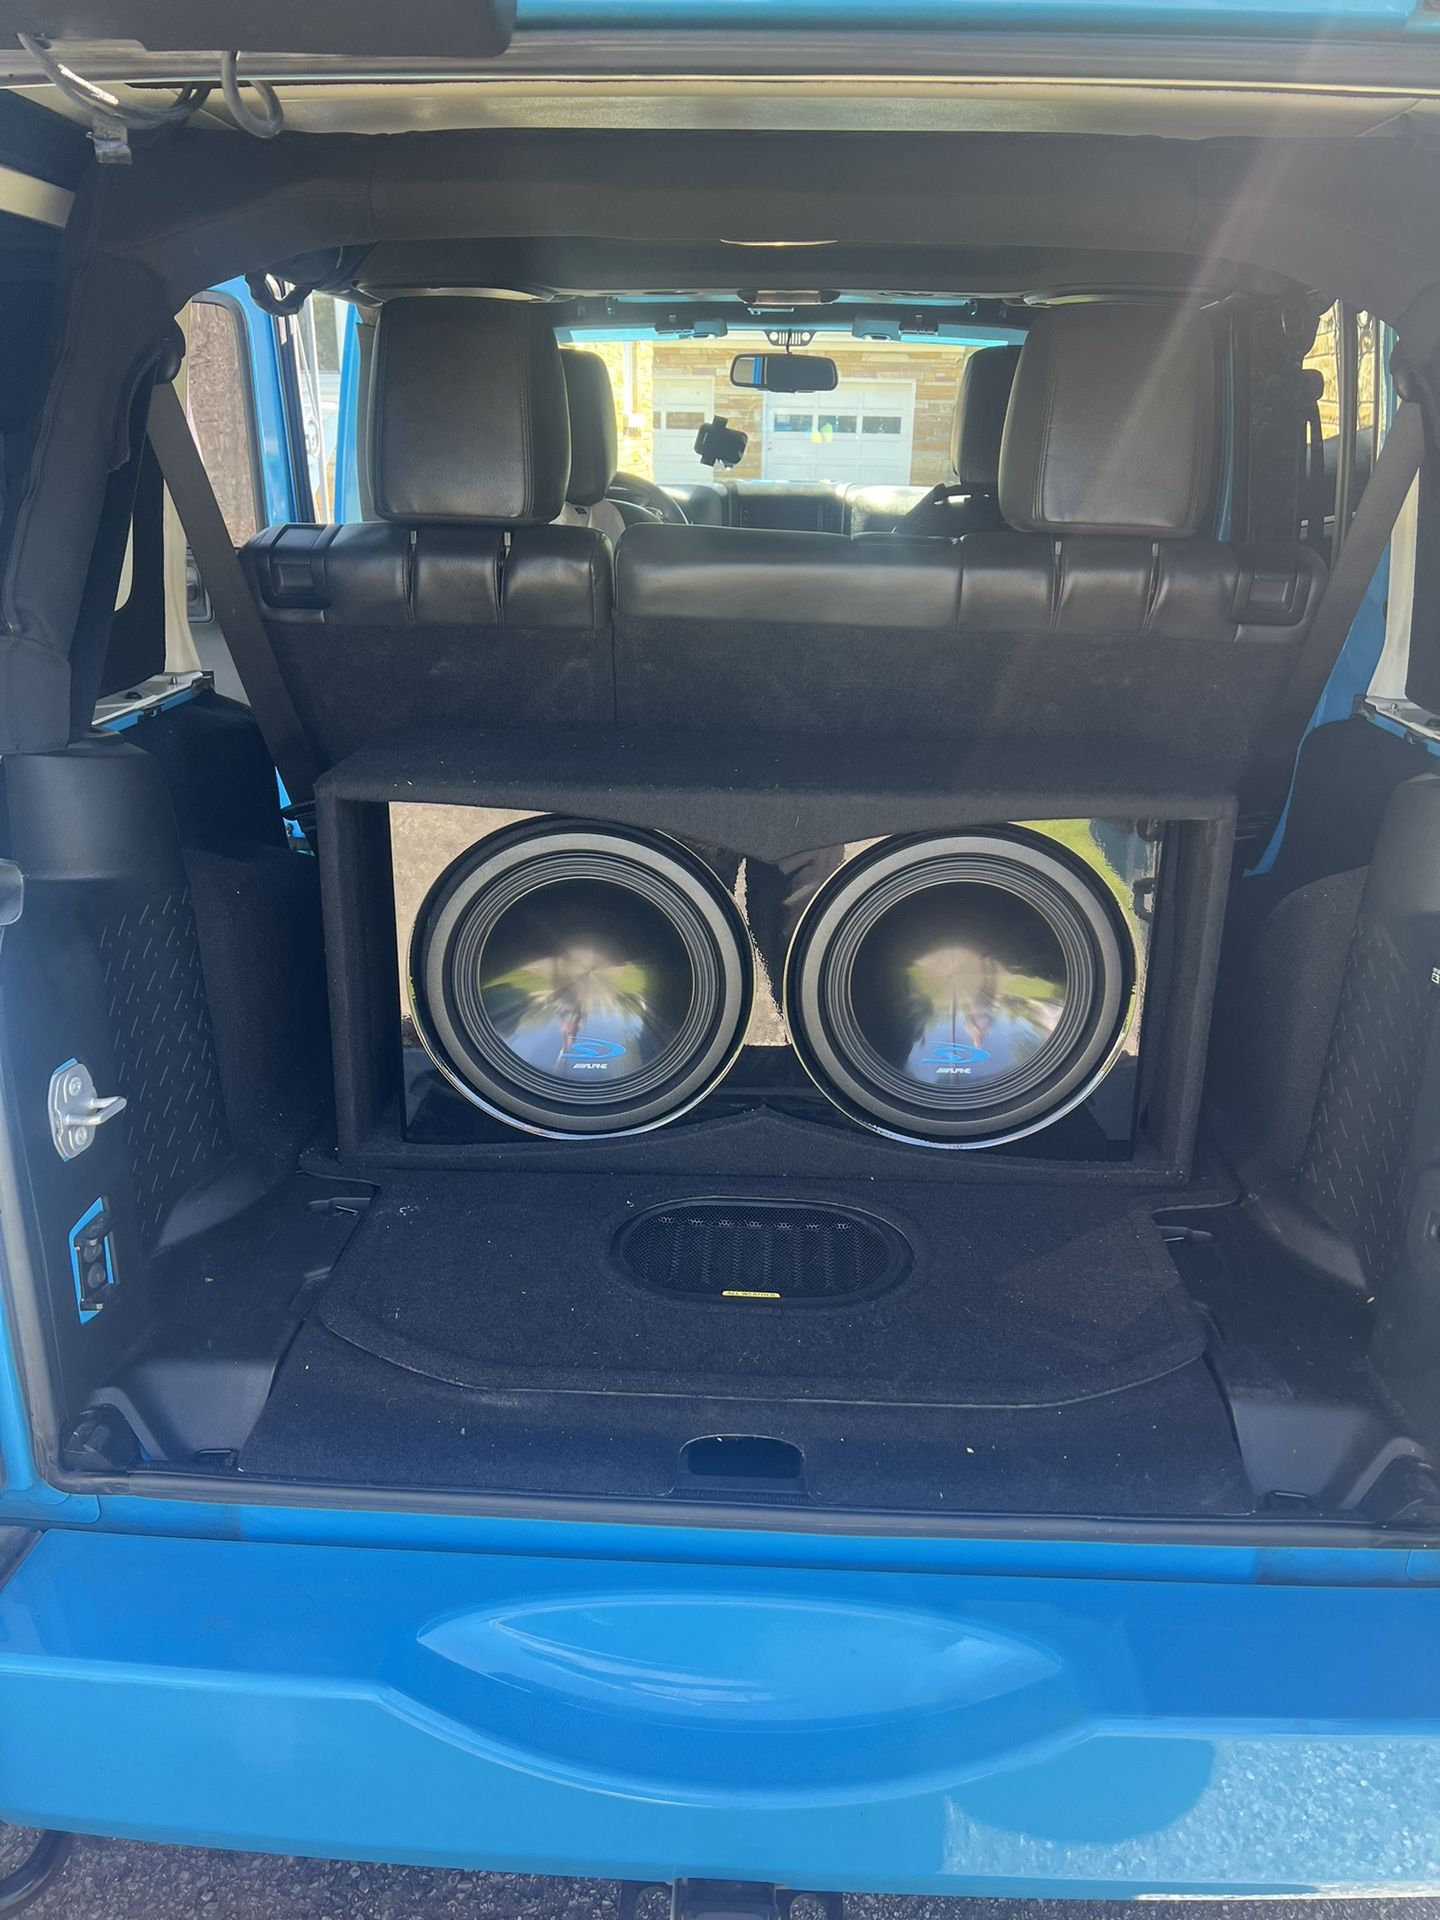 12 Inch Apline Type S Sub With Amps